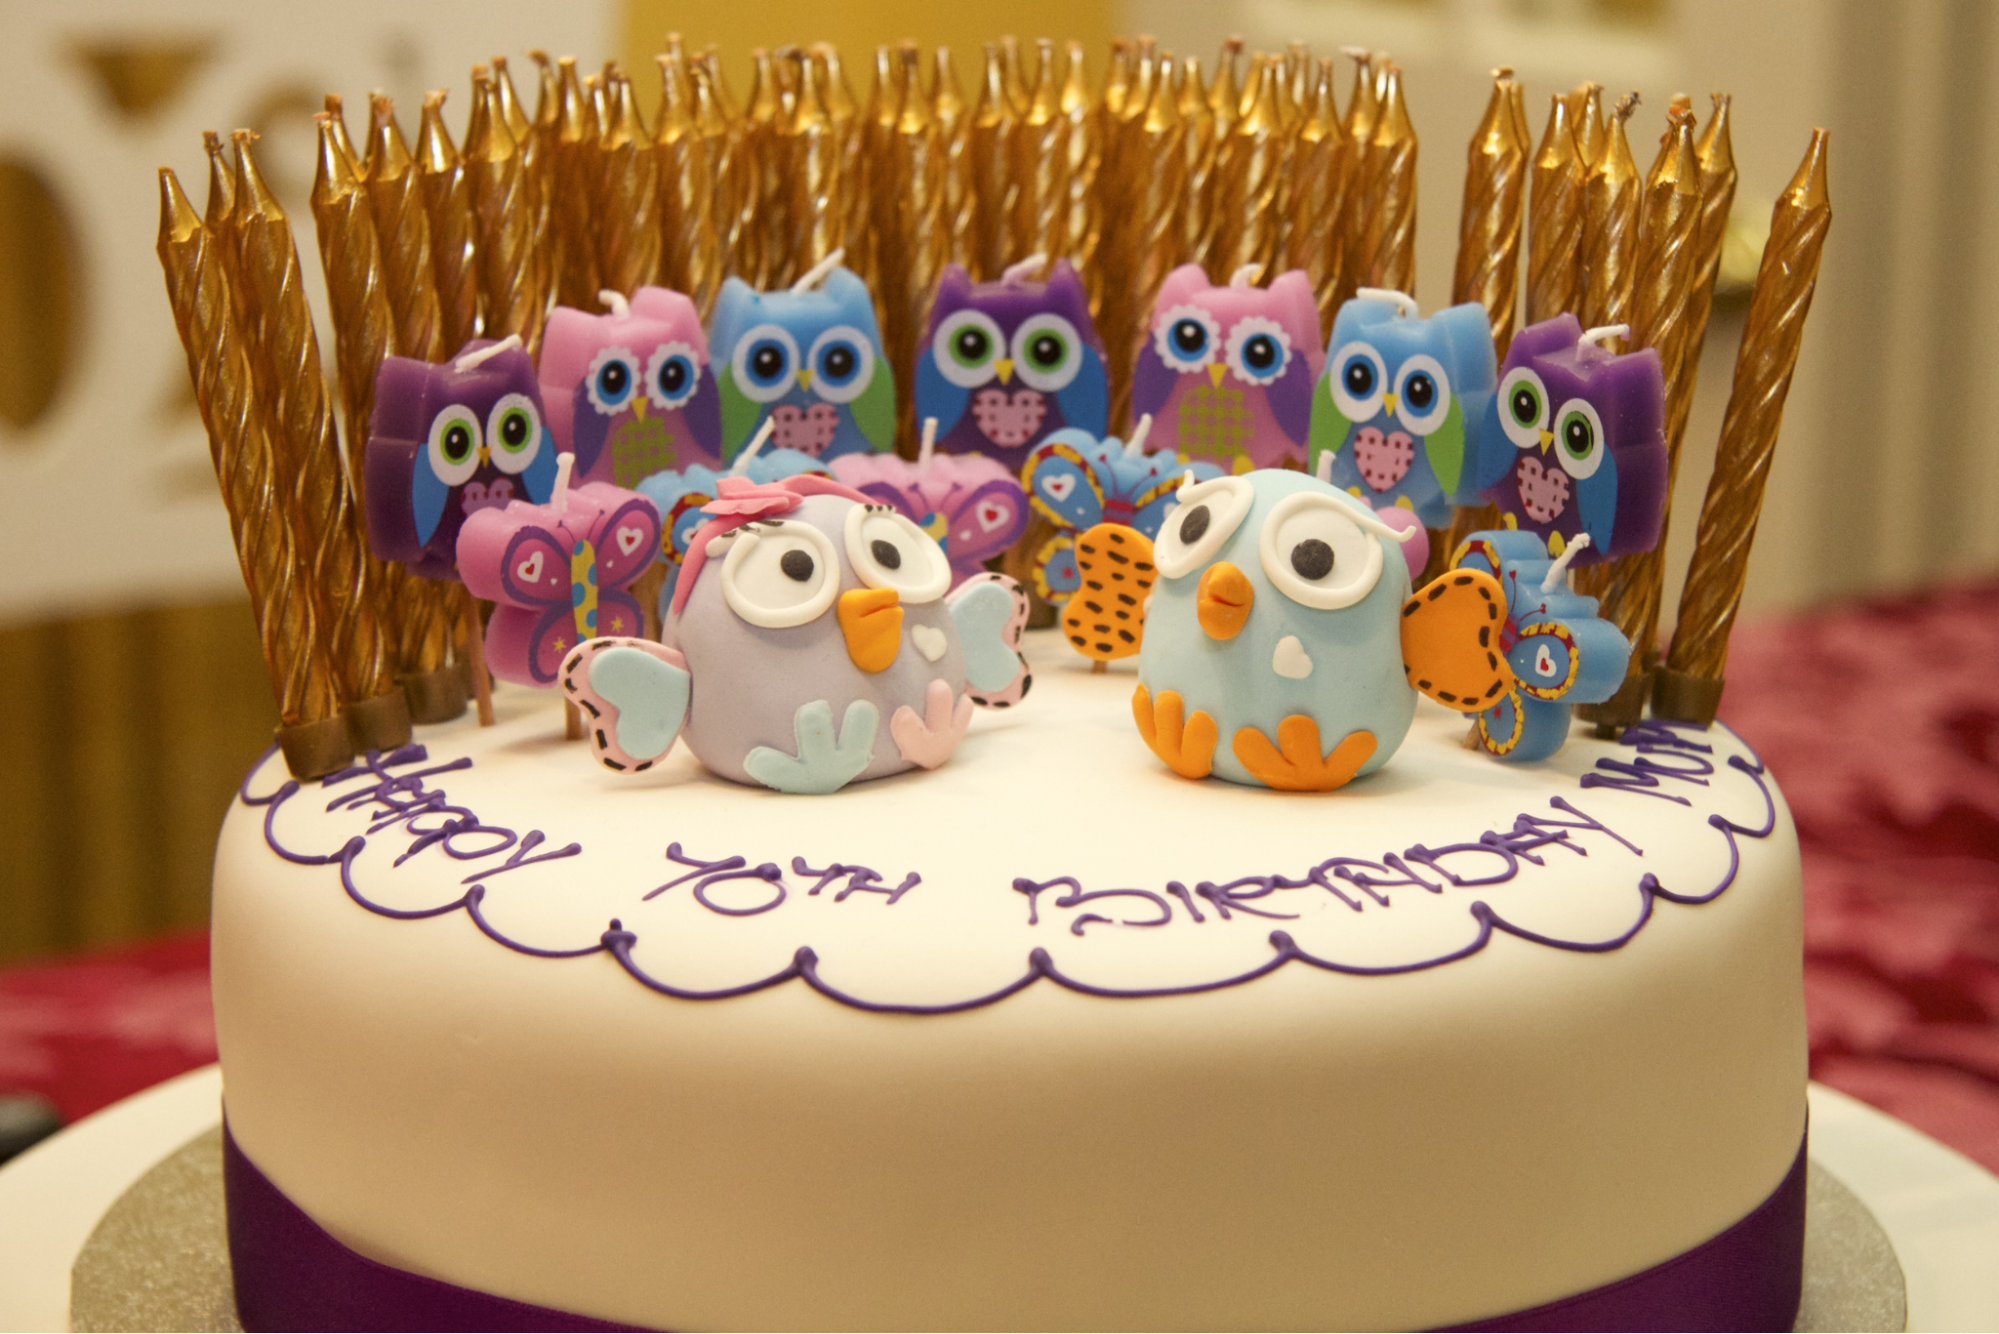  Owl-themed birthday candles in various colors